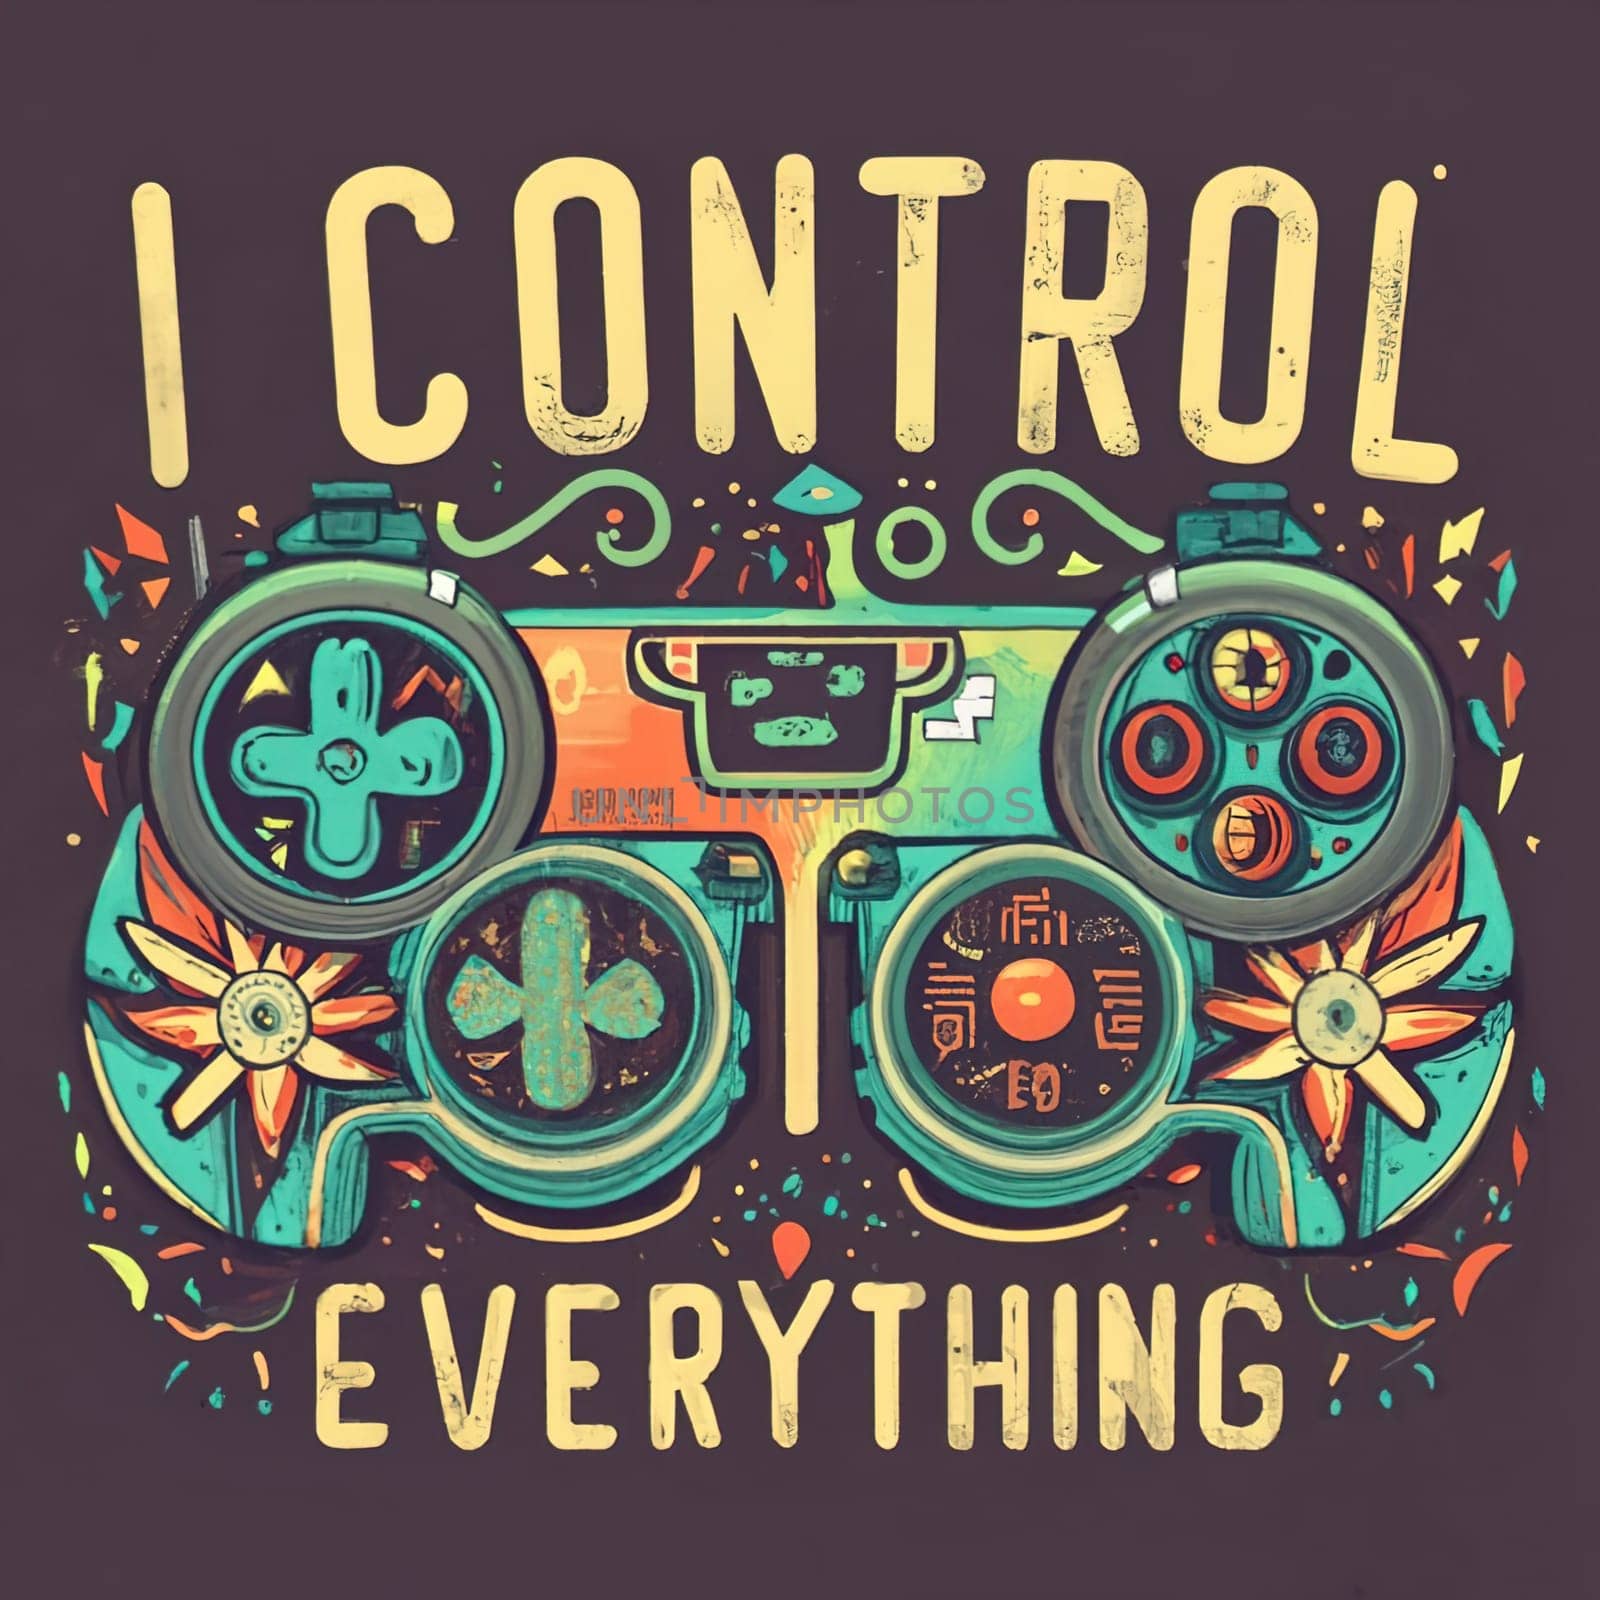 T-shirt design, retro gamepad with colorful ultra-intricate details, text I control everything, typography, illustration, dark fantasy download image